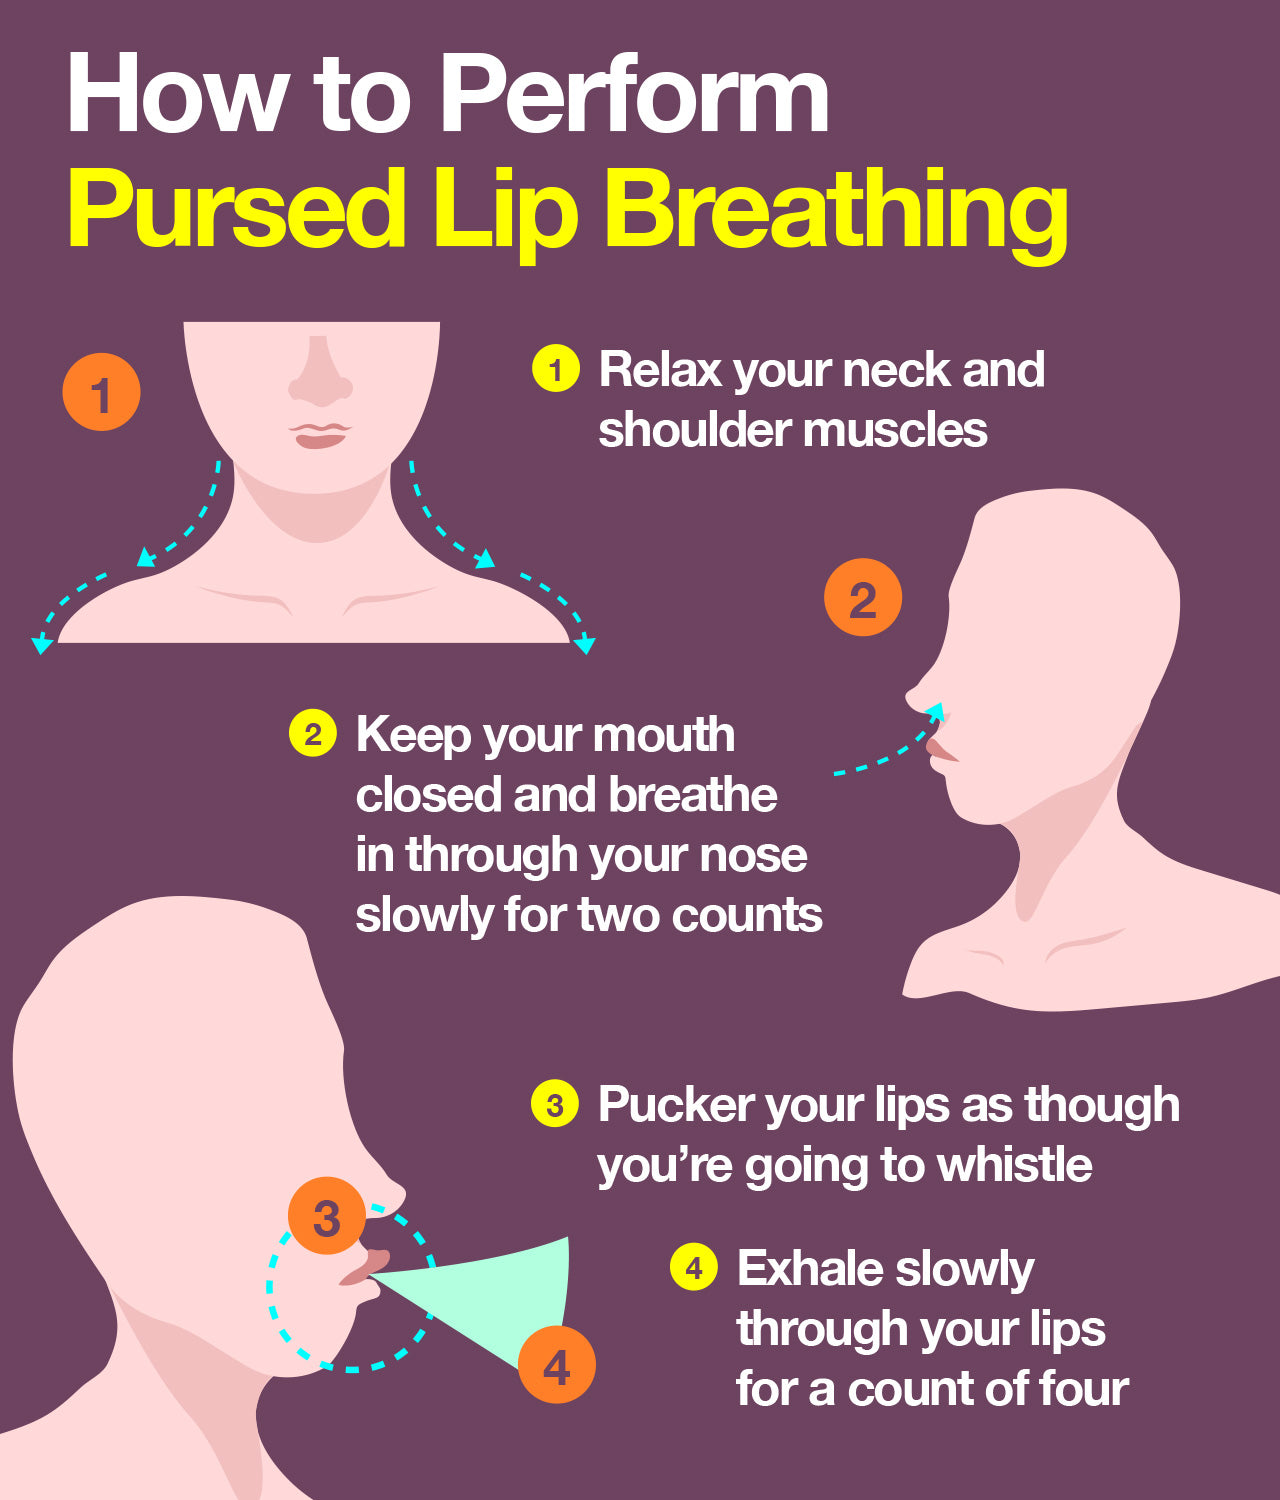 How to do pursed lip breathing